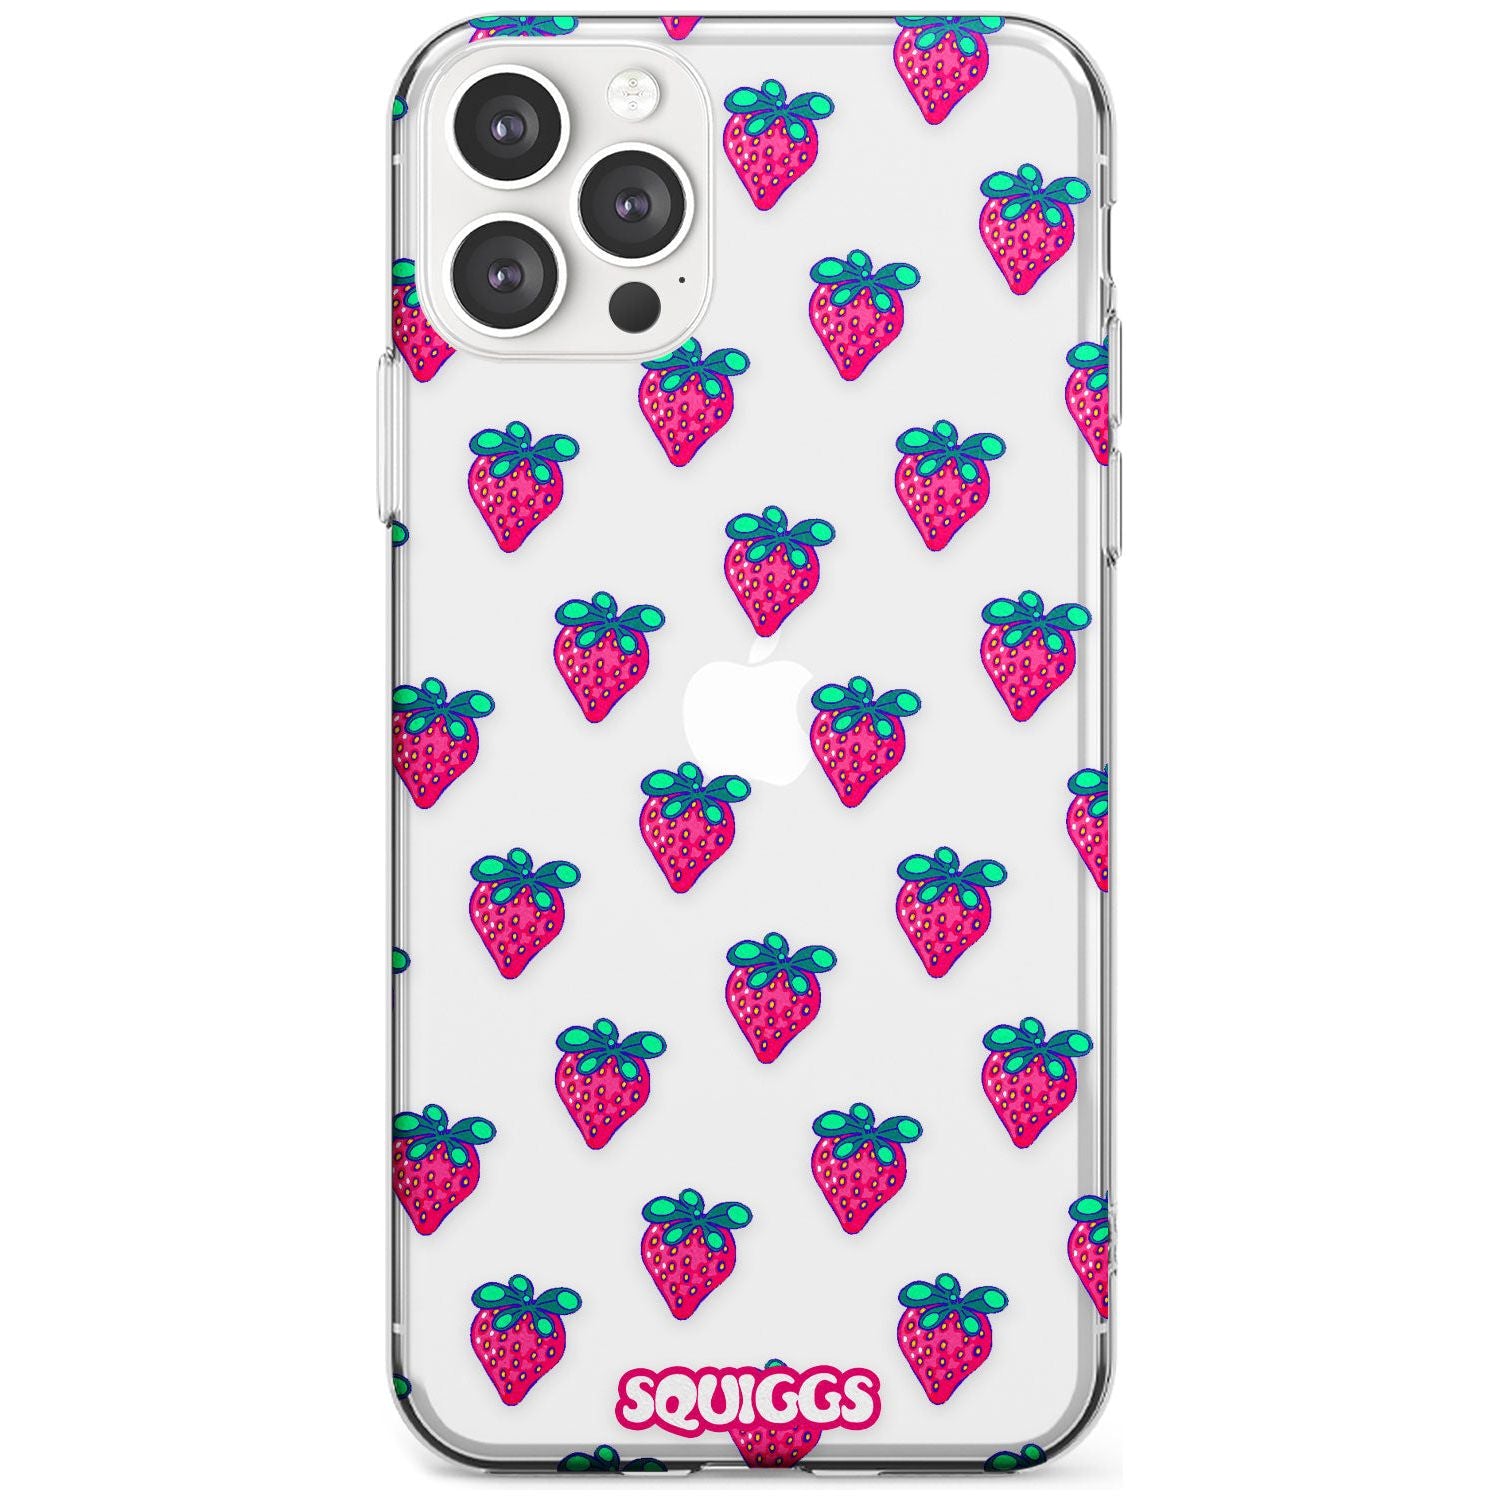 Strawberry Patch Black Impact Phone Case for iPhone 11 Pro Max